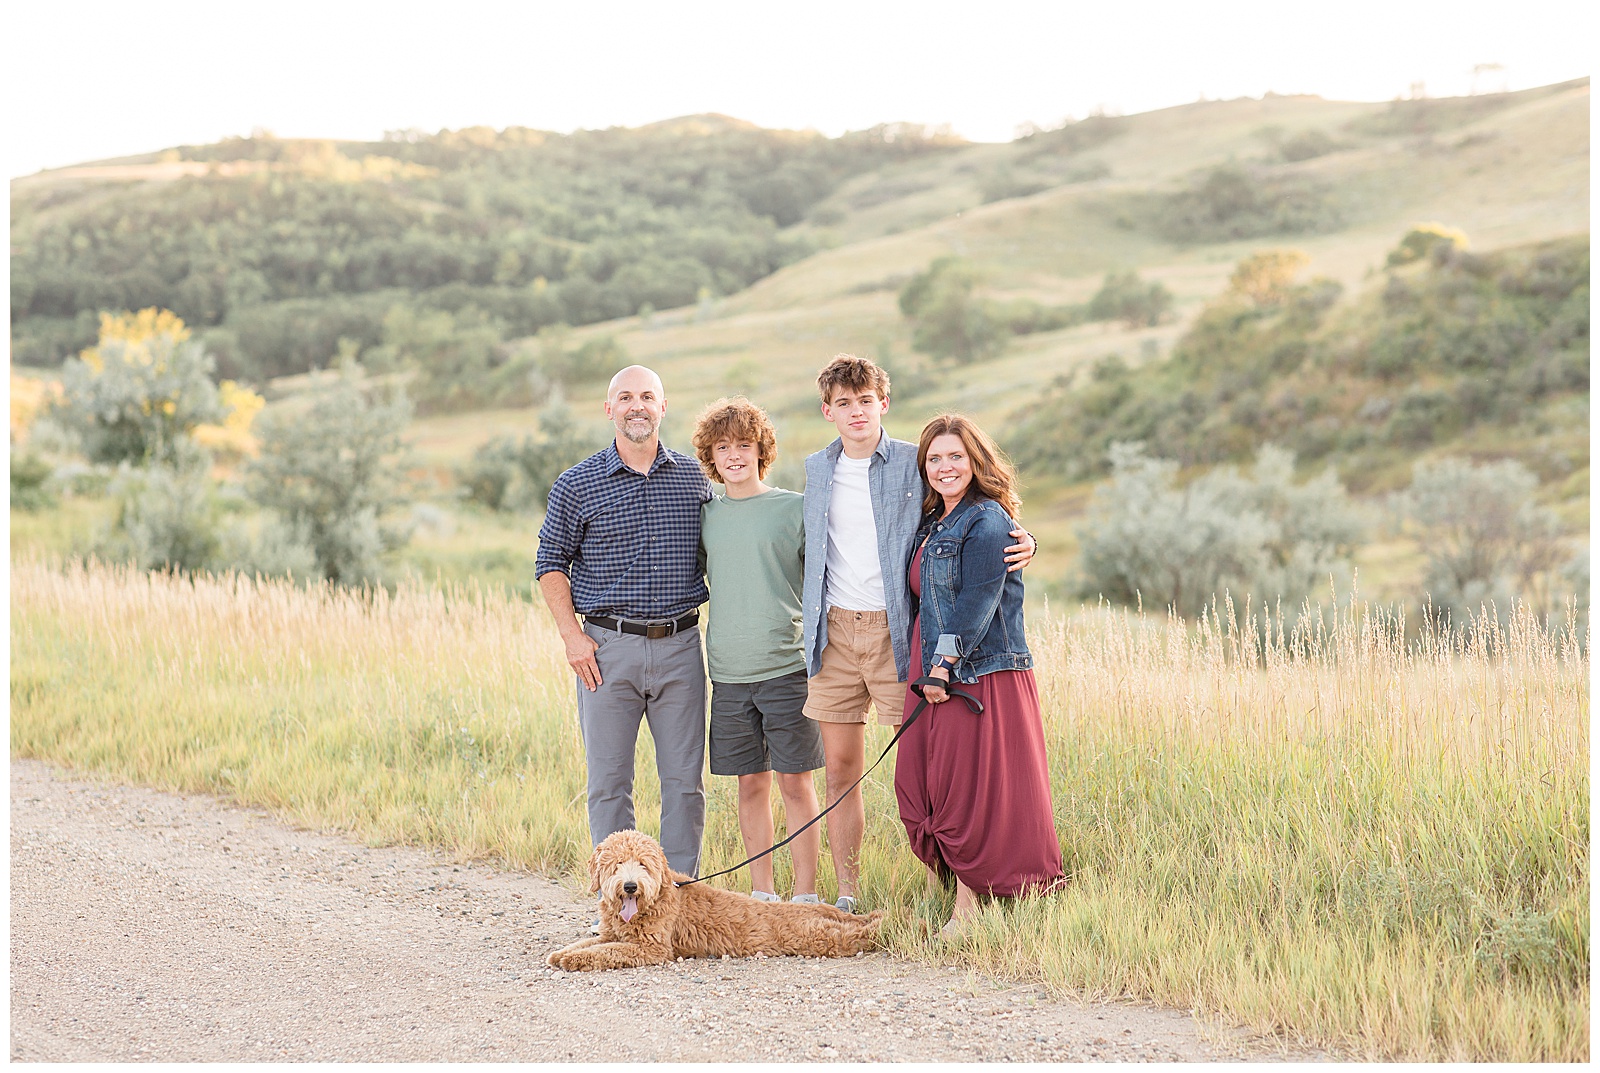 North Dakota Family Photographer photographs family of 4 and goldendoodle pup for course designed for family photographers.